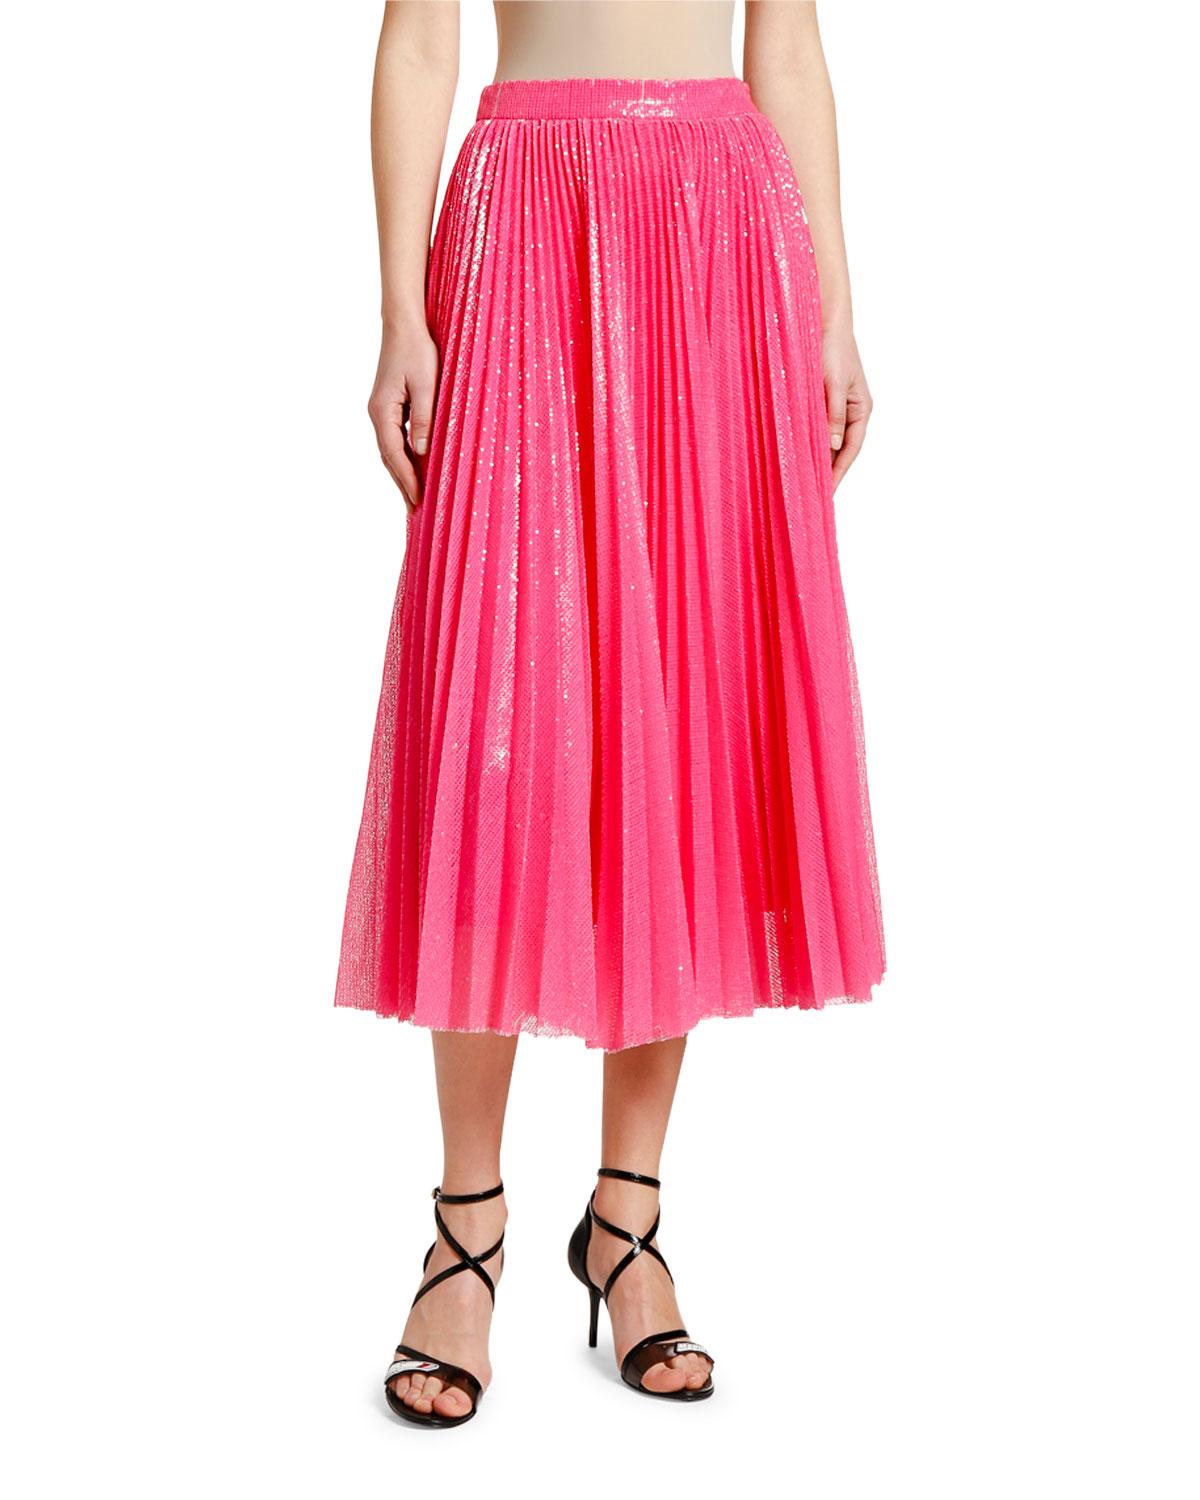 MSGM Shimmery Pleated Long Skirt in Pink - Lyst